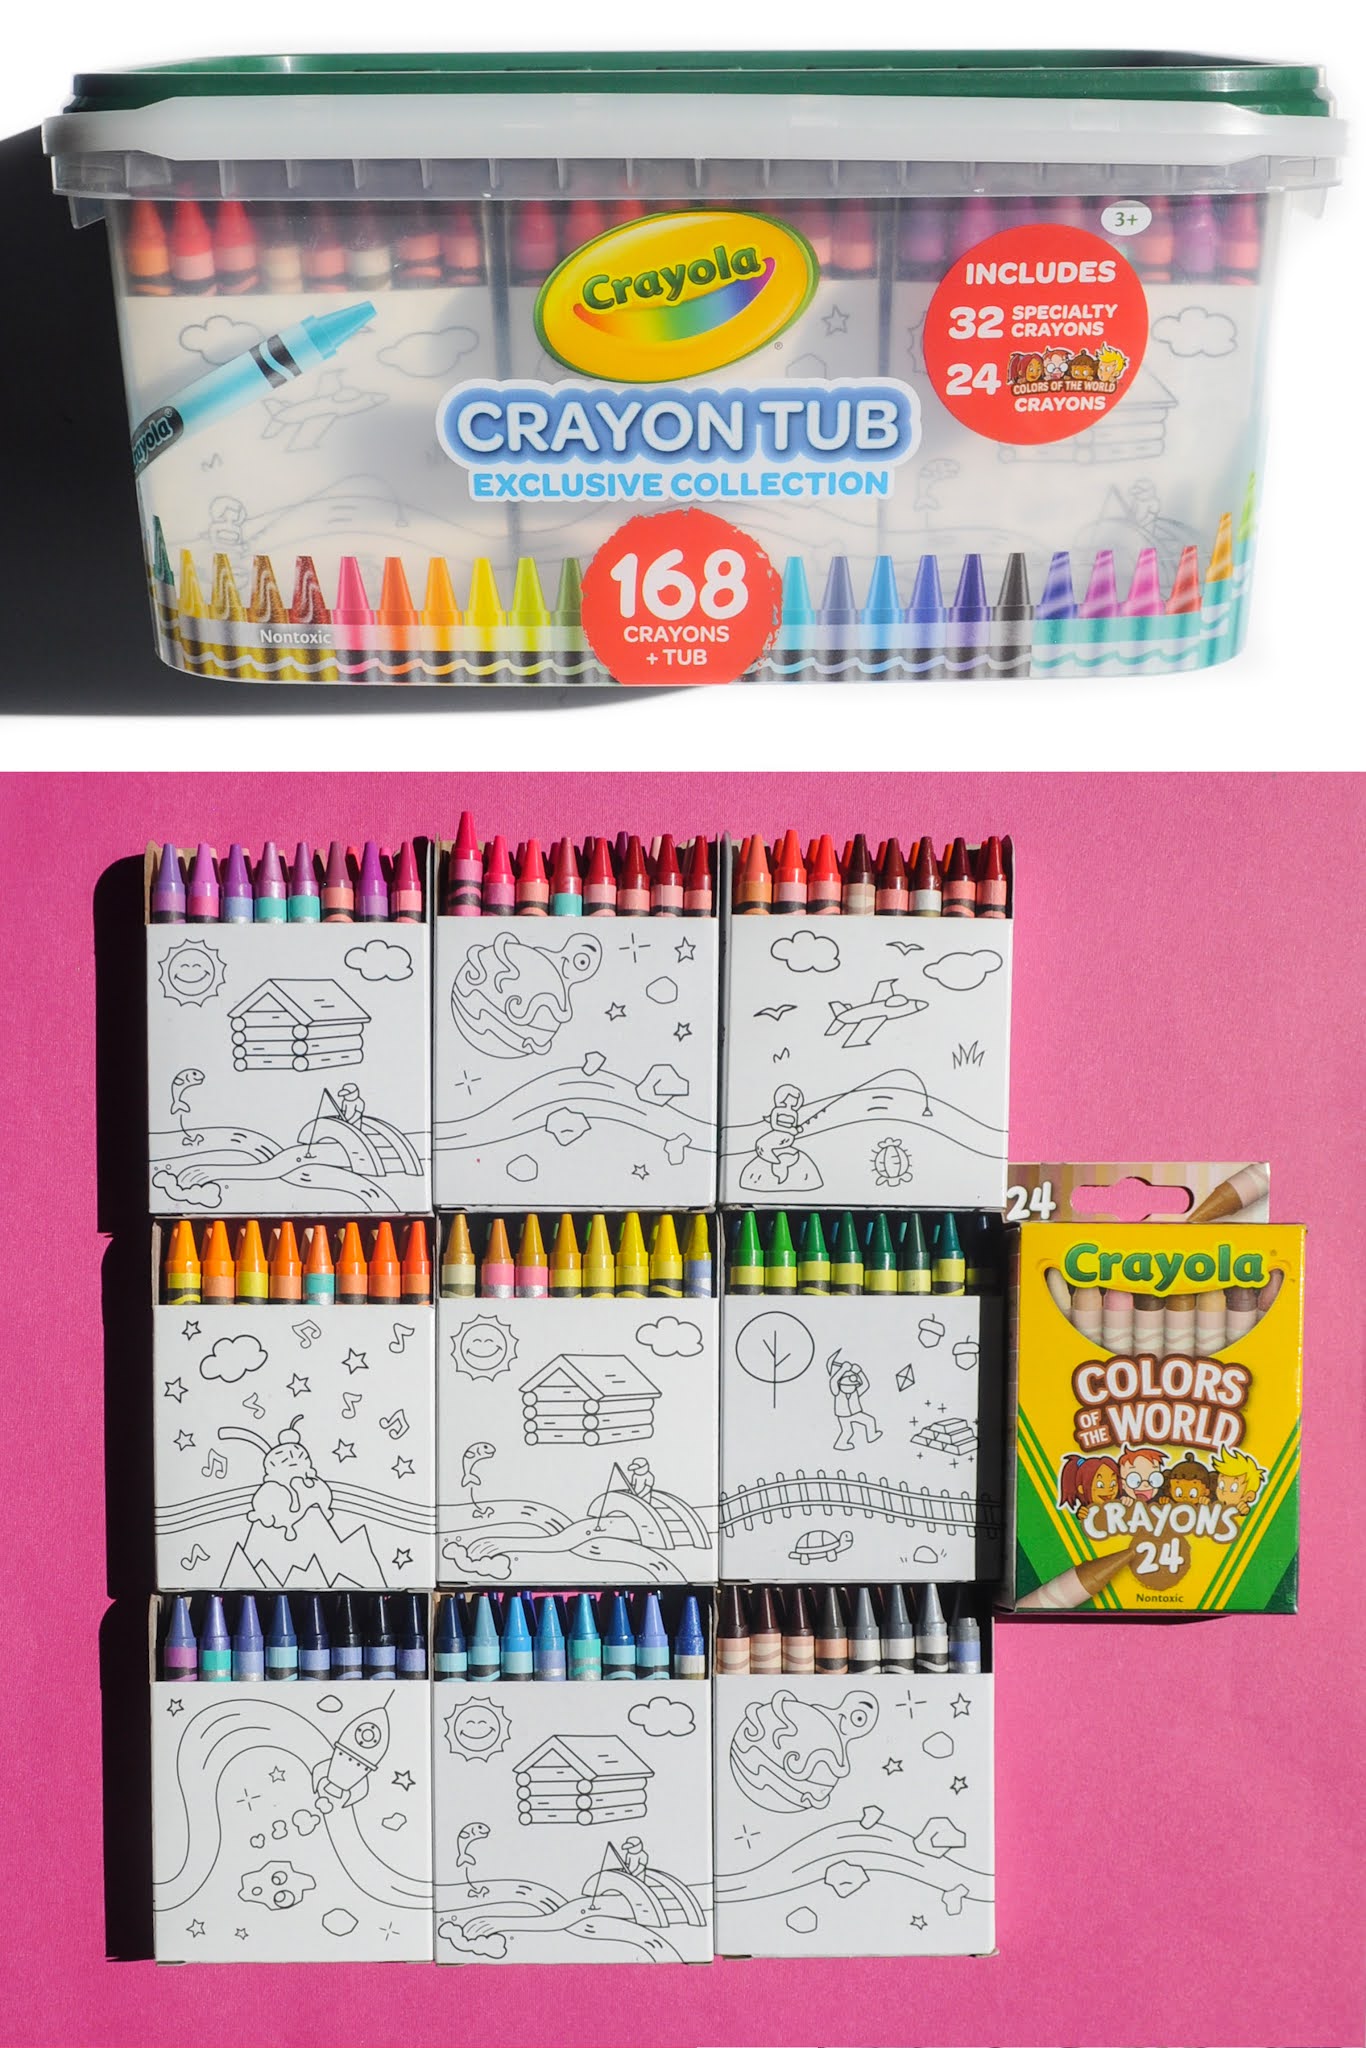 Crayola Crayon and Storage Tub, 168 Crayons, Gift for Kids - DroneUp  Delivery